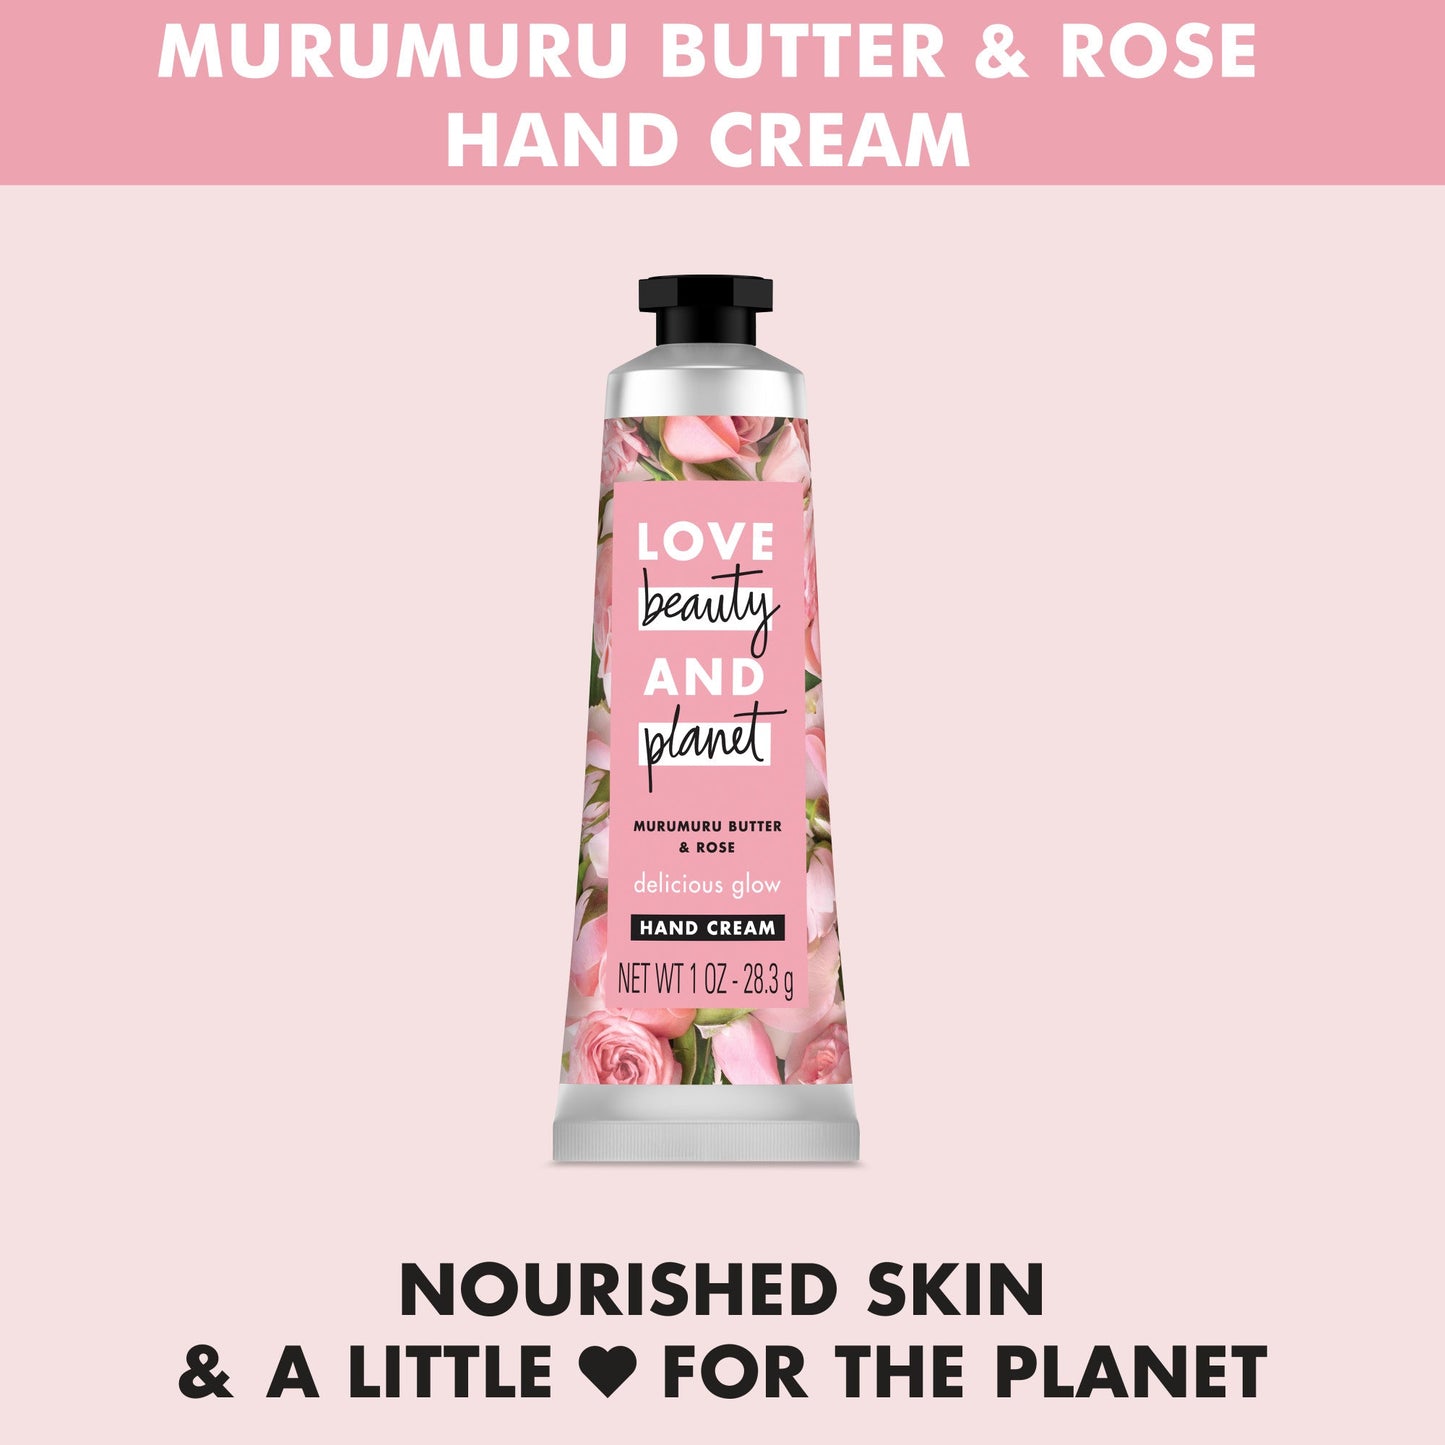 Love Beauty and Planet Murumuru Butter & Rose Delicious Glow Hand Cream Body Lotion - Rose - 1oz